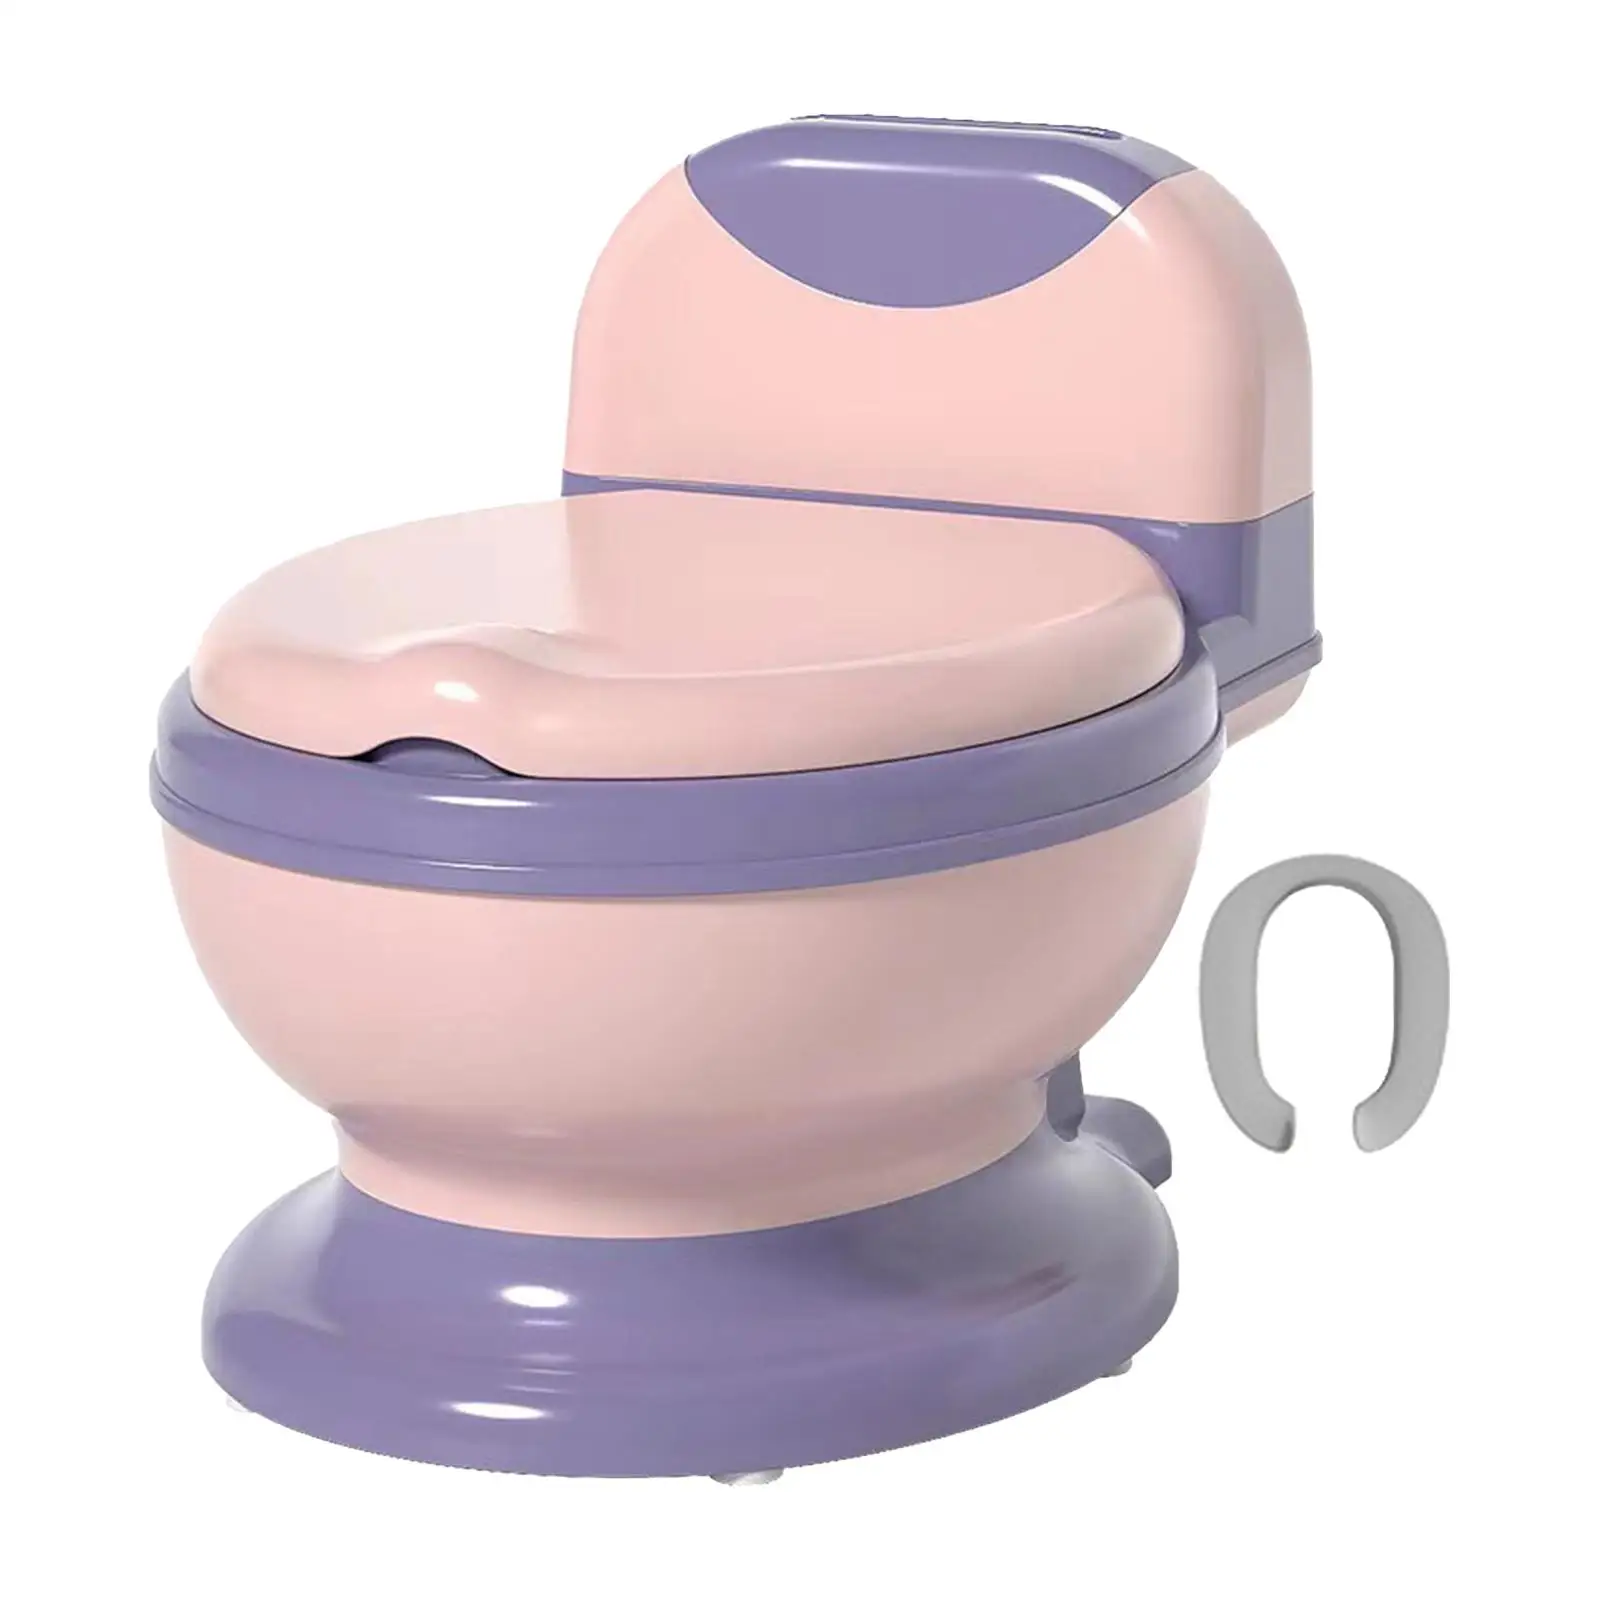 Potty Train Toilet Portable Potty Train Seat Comfortable Detachable Real Feel Potty for Baby Toddlers Kids Girls Children